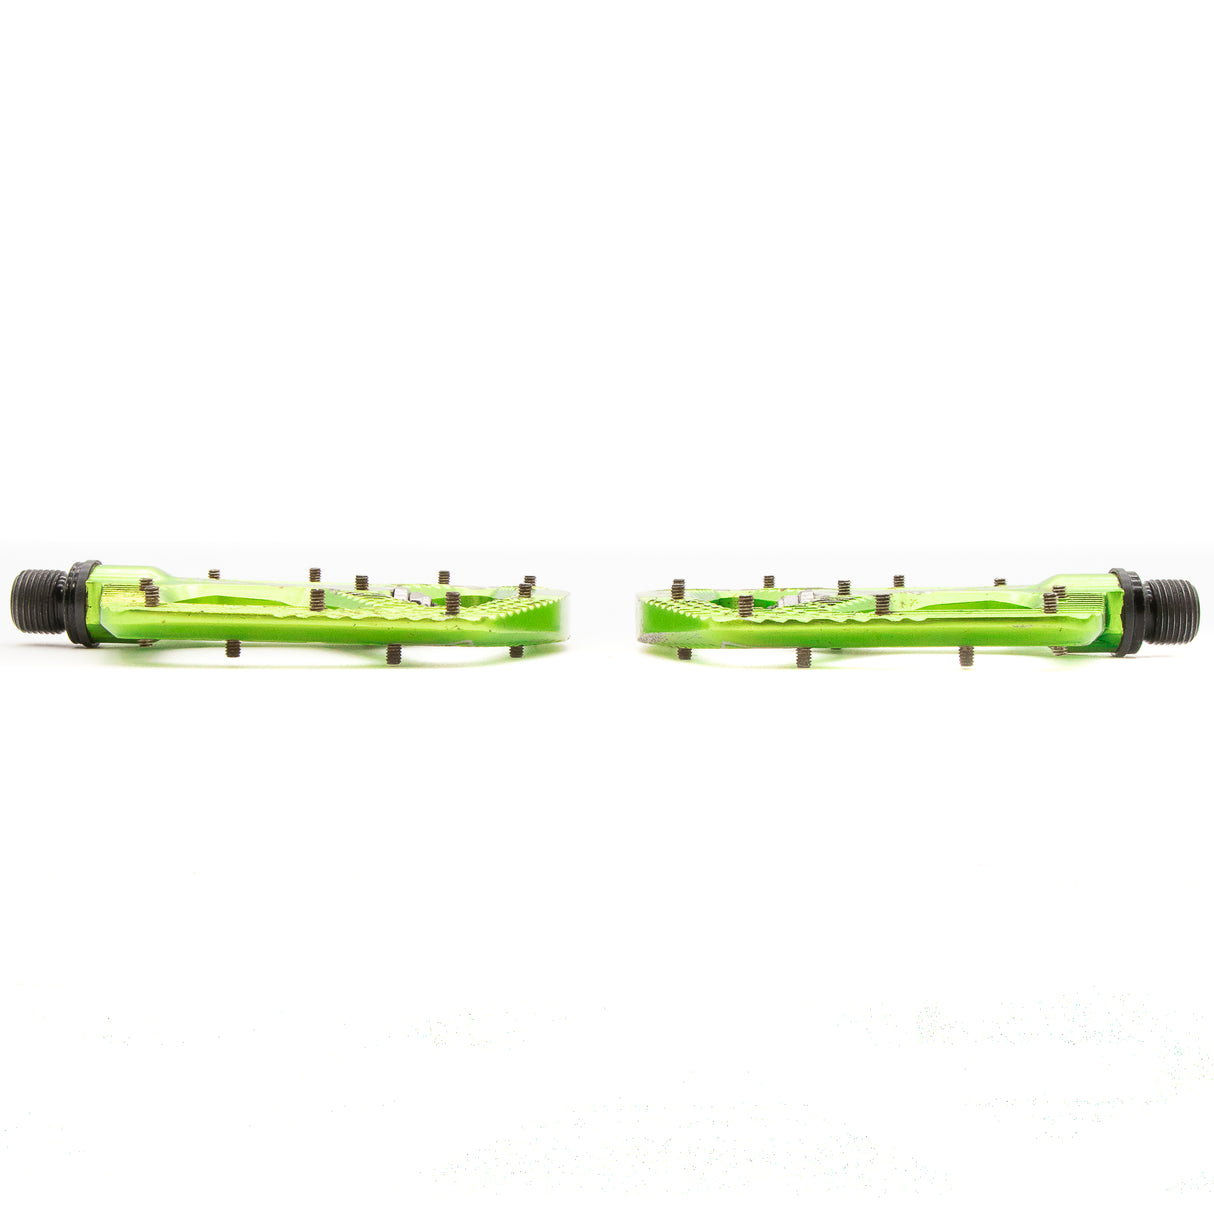 Canfield Crampon Ultimate Fern Green Pedals 331g